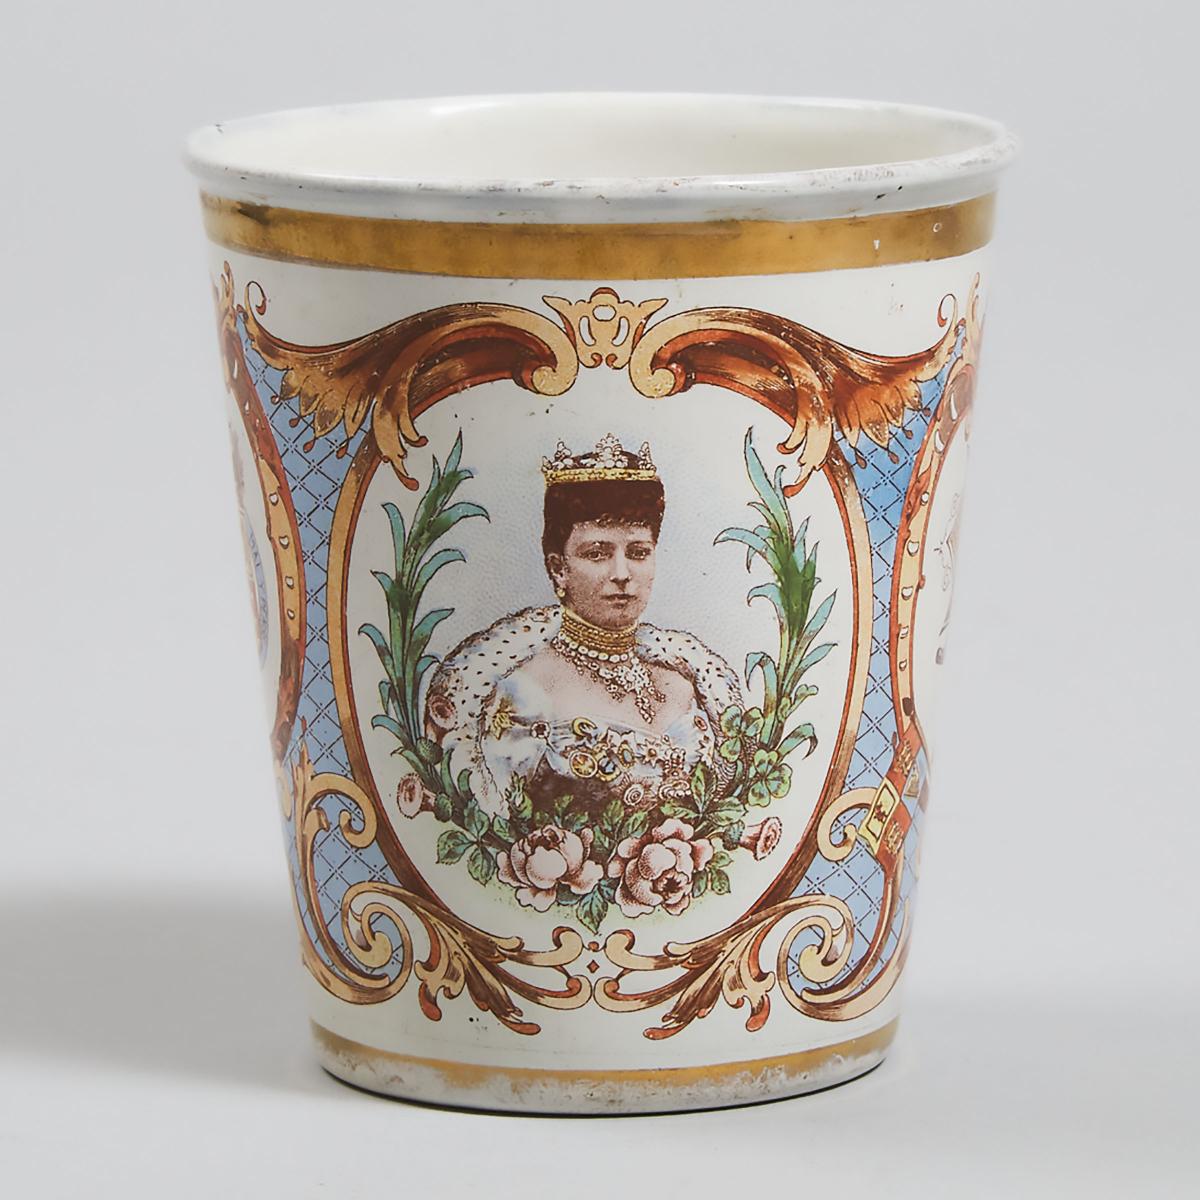 English Enamelled Copper Cup Commemorating the Coronation of Edward VII, 1902, height 0.4 in — 1 cm